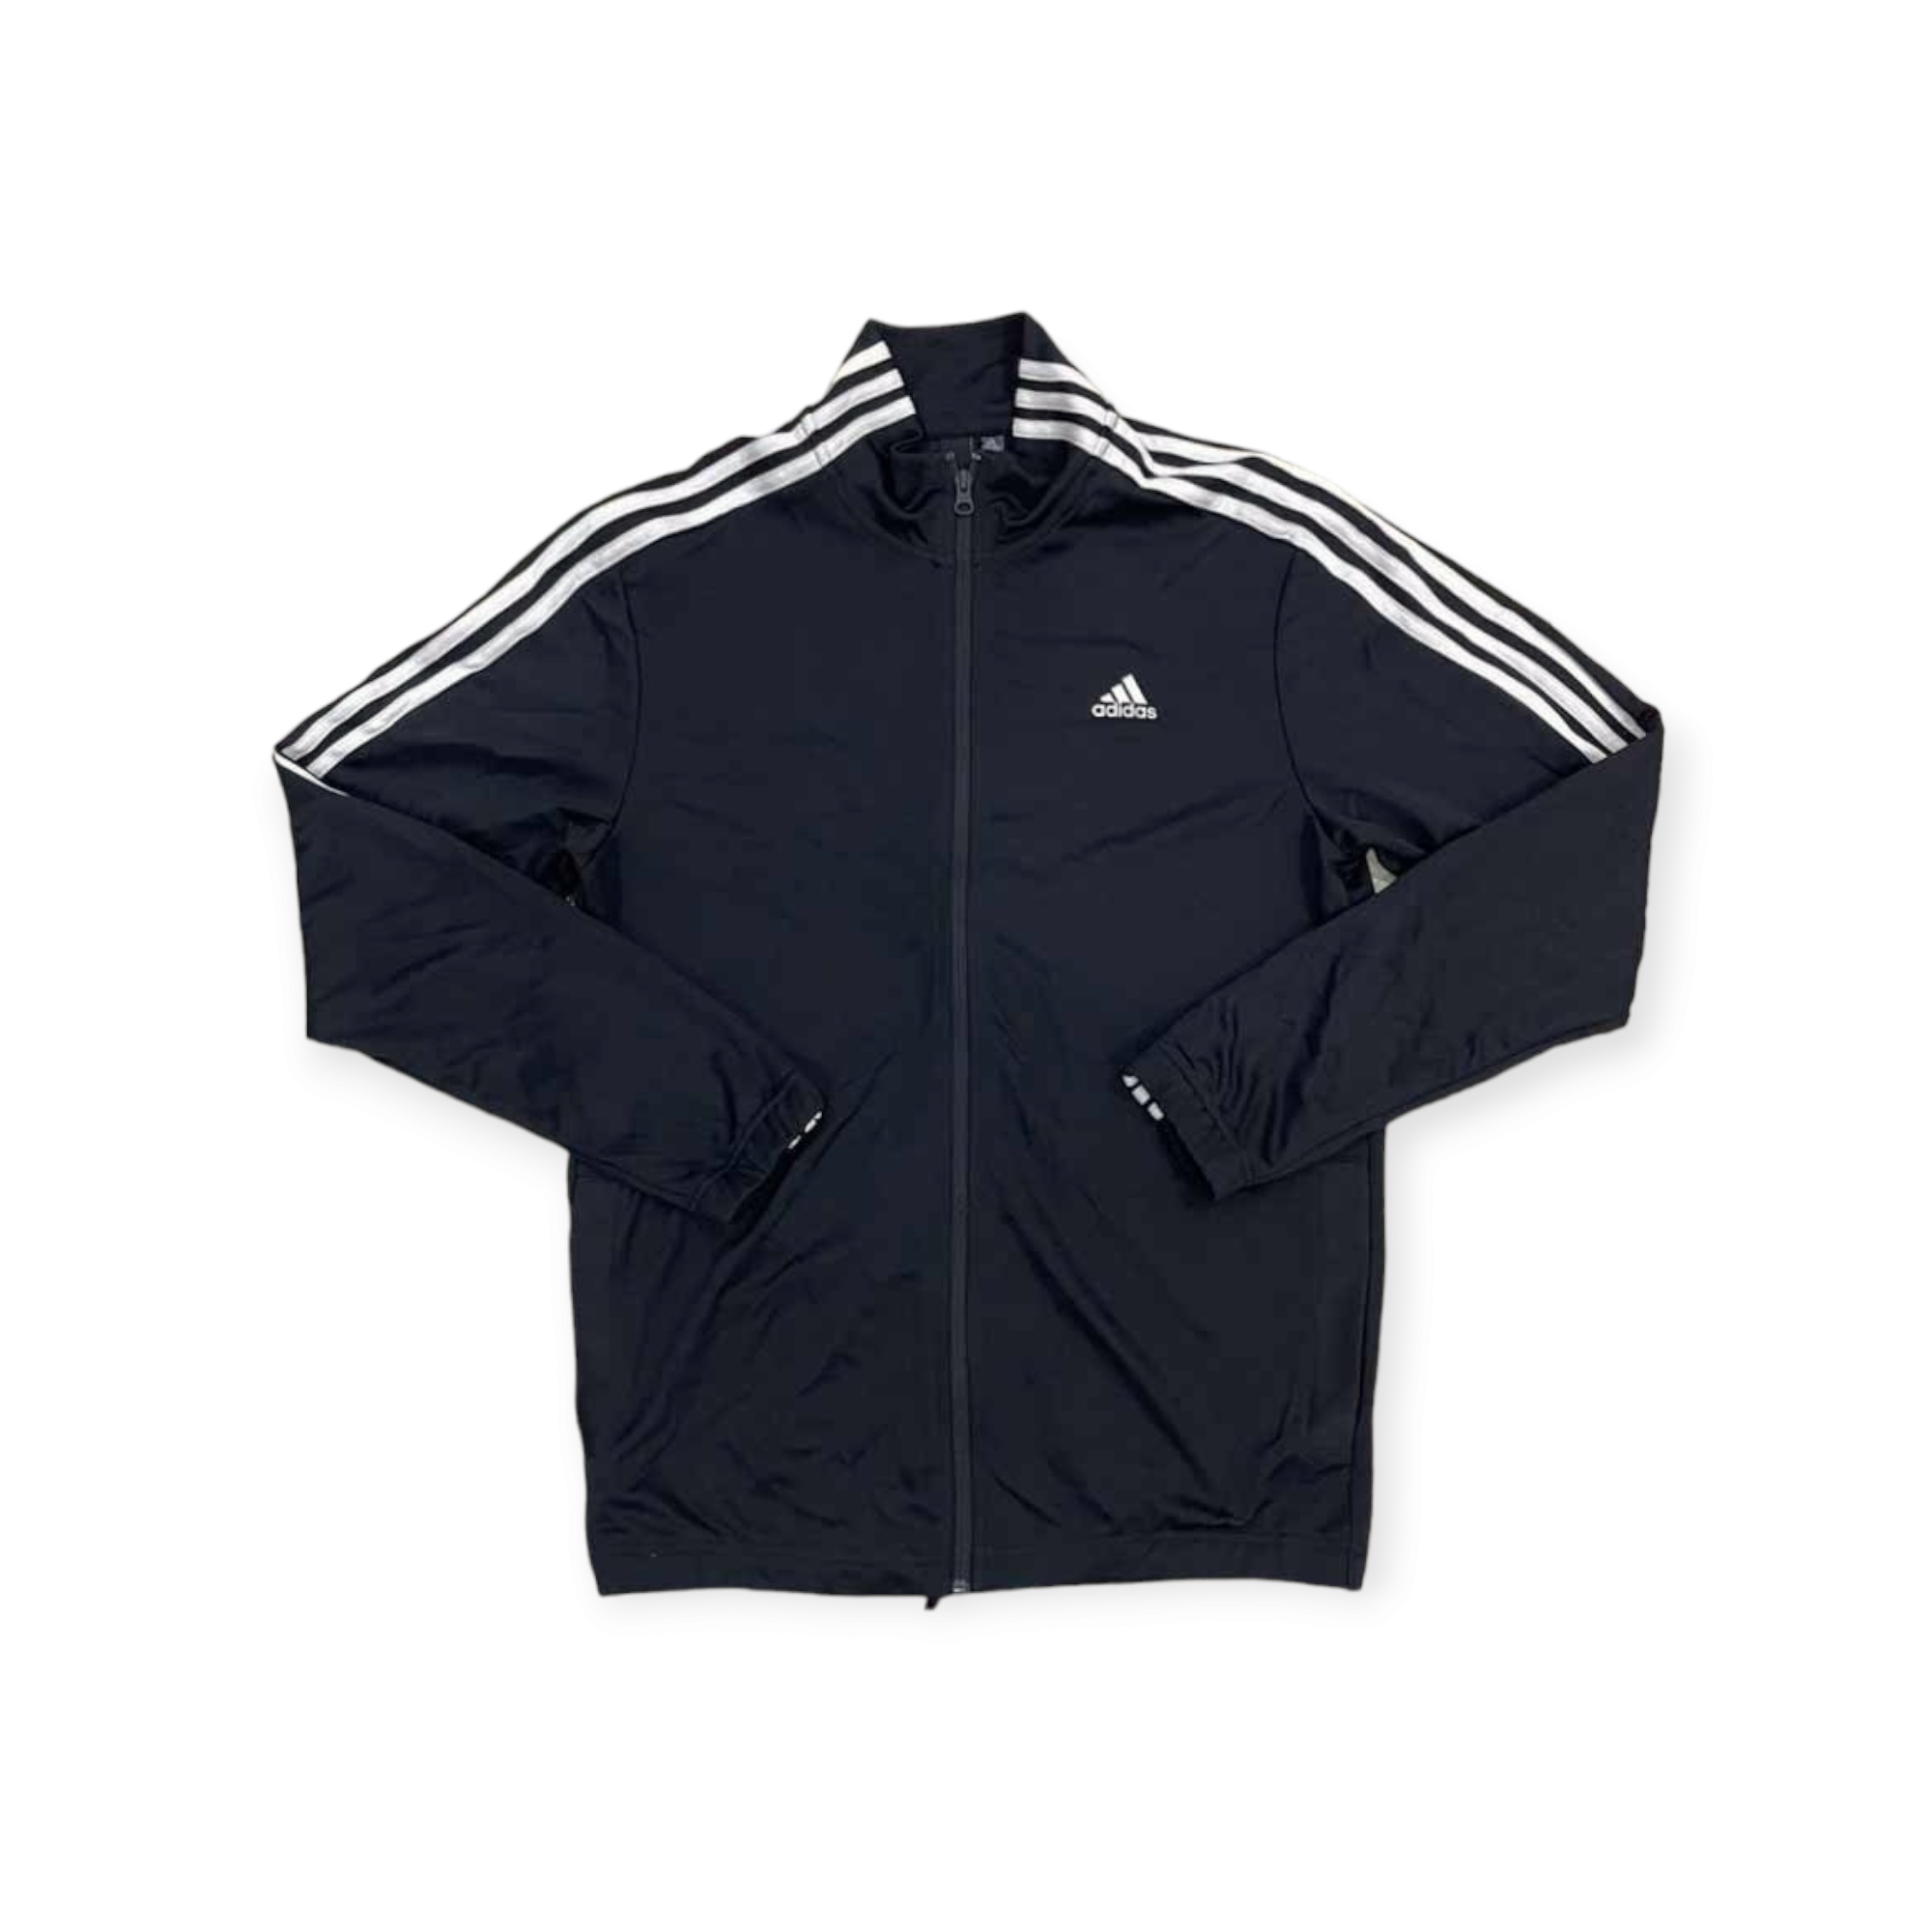 Adidas Sportswear Tapered Track Suit